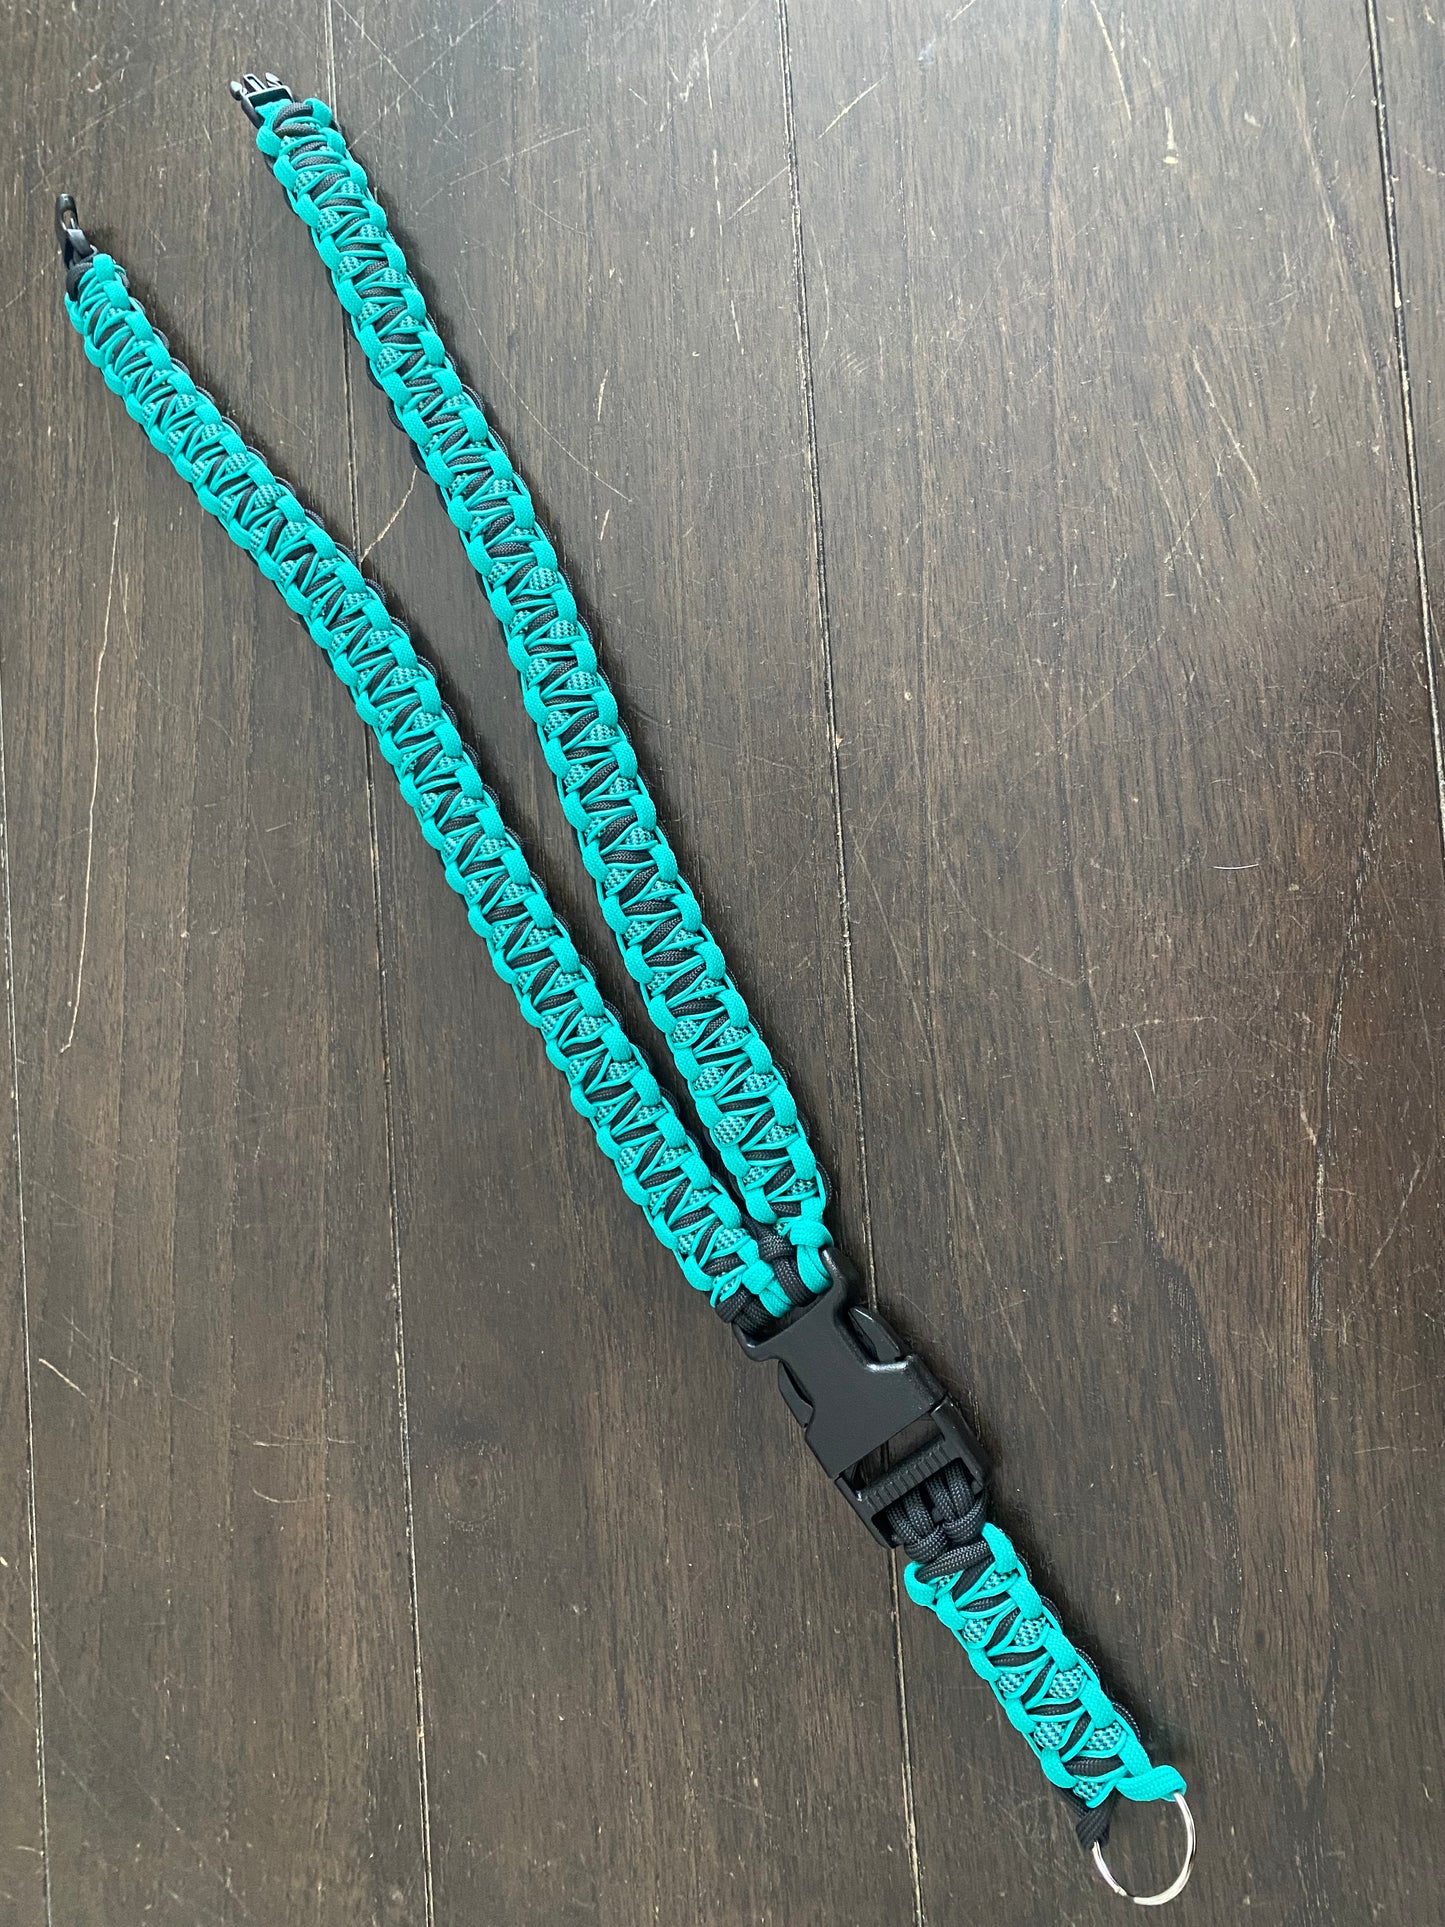 Premade Paracord Soloman's Dragon Lanyard, Teal, Black, and Color-Changing Teal